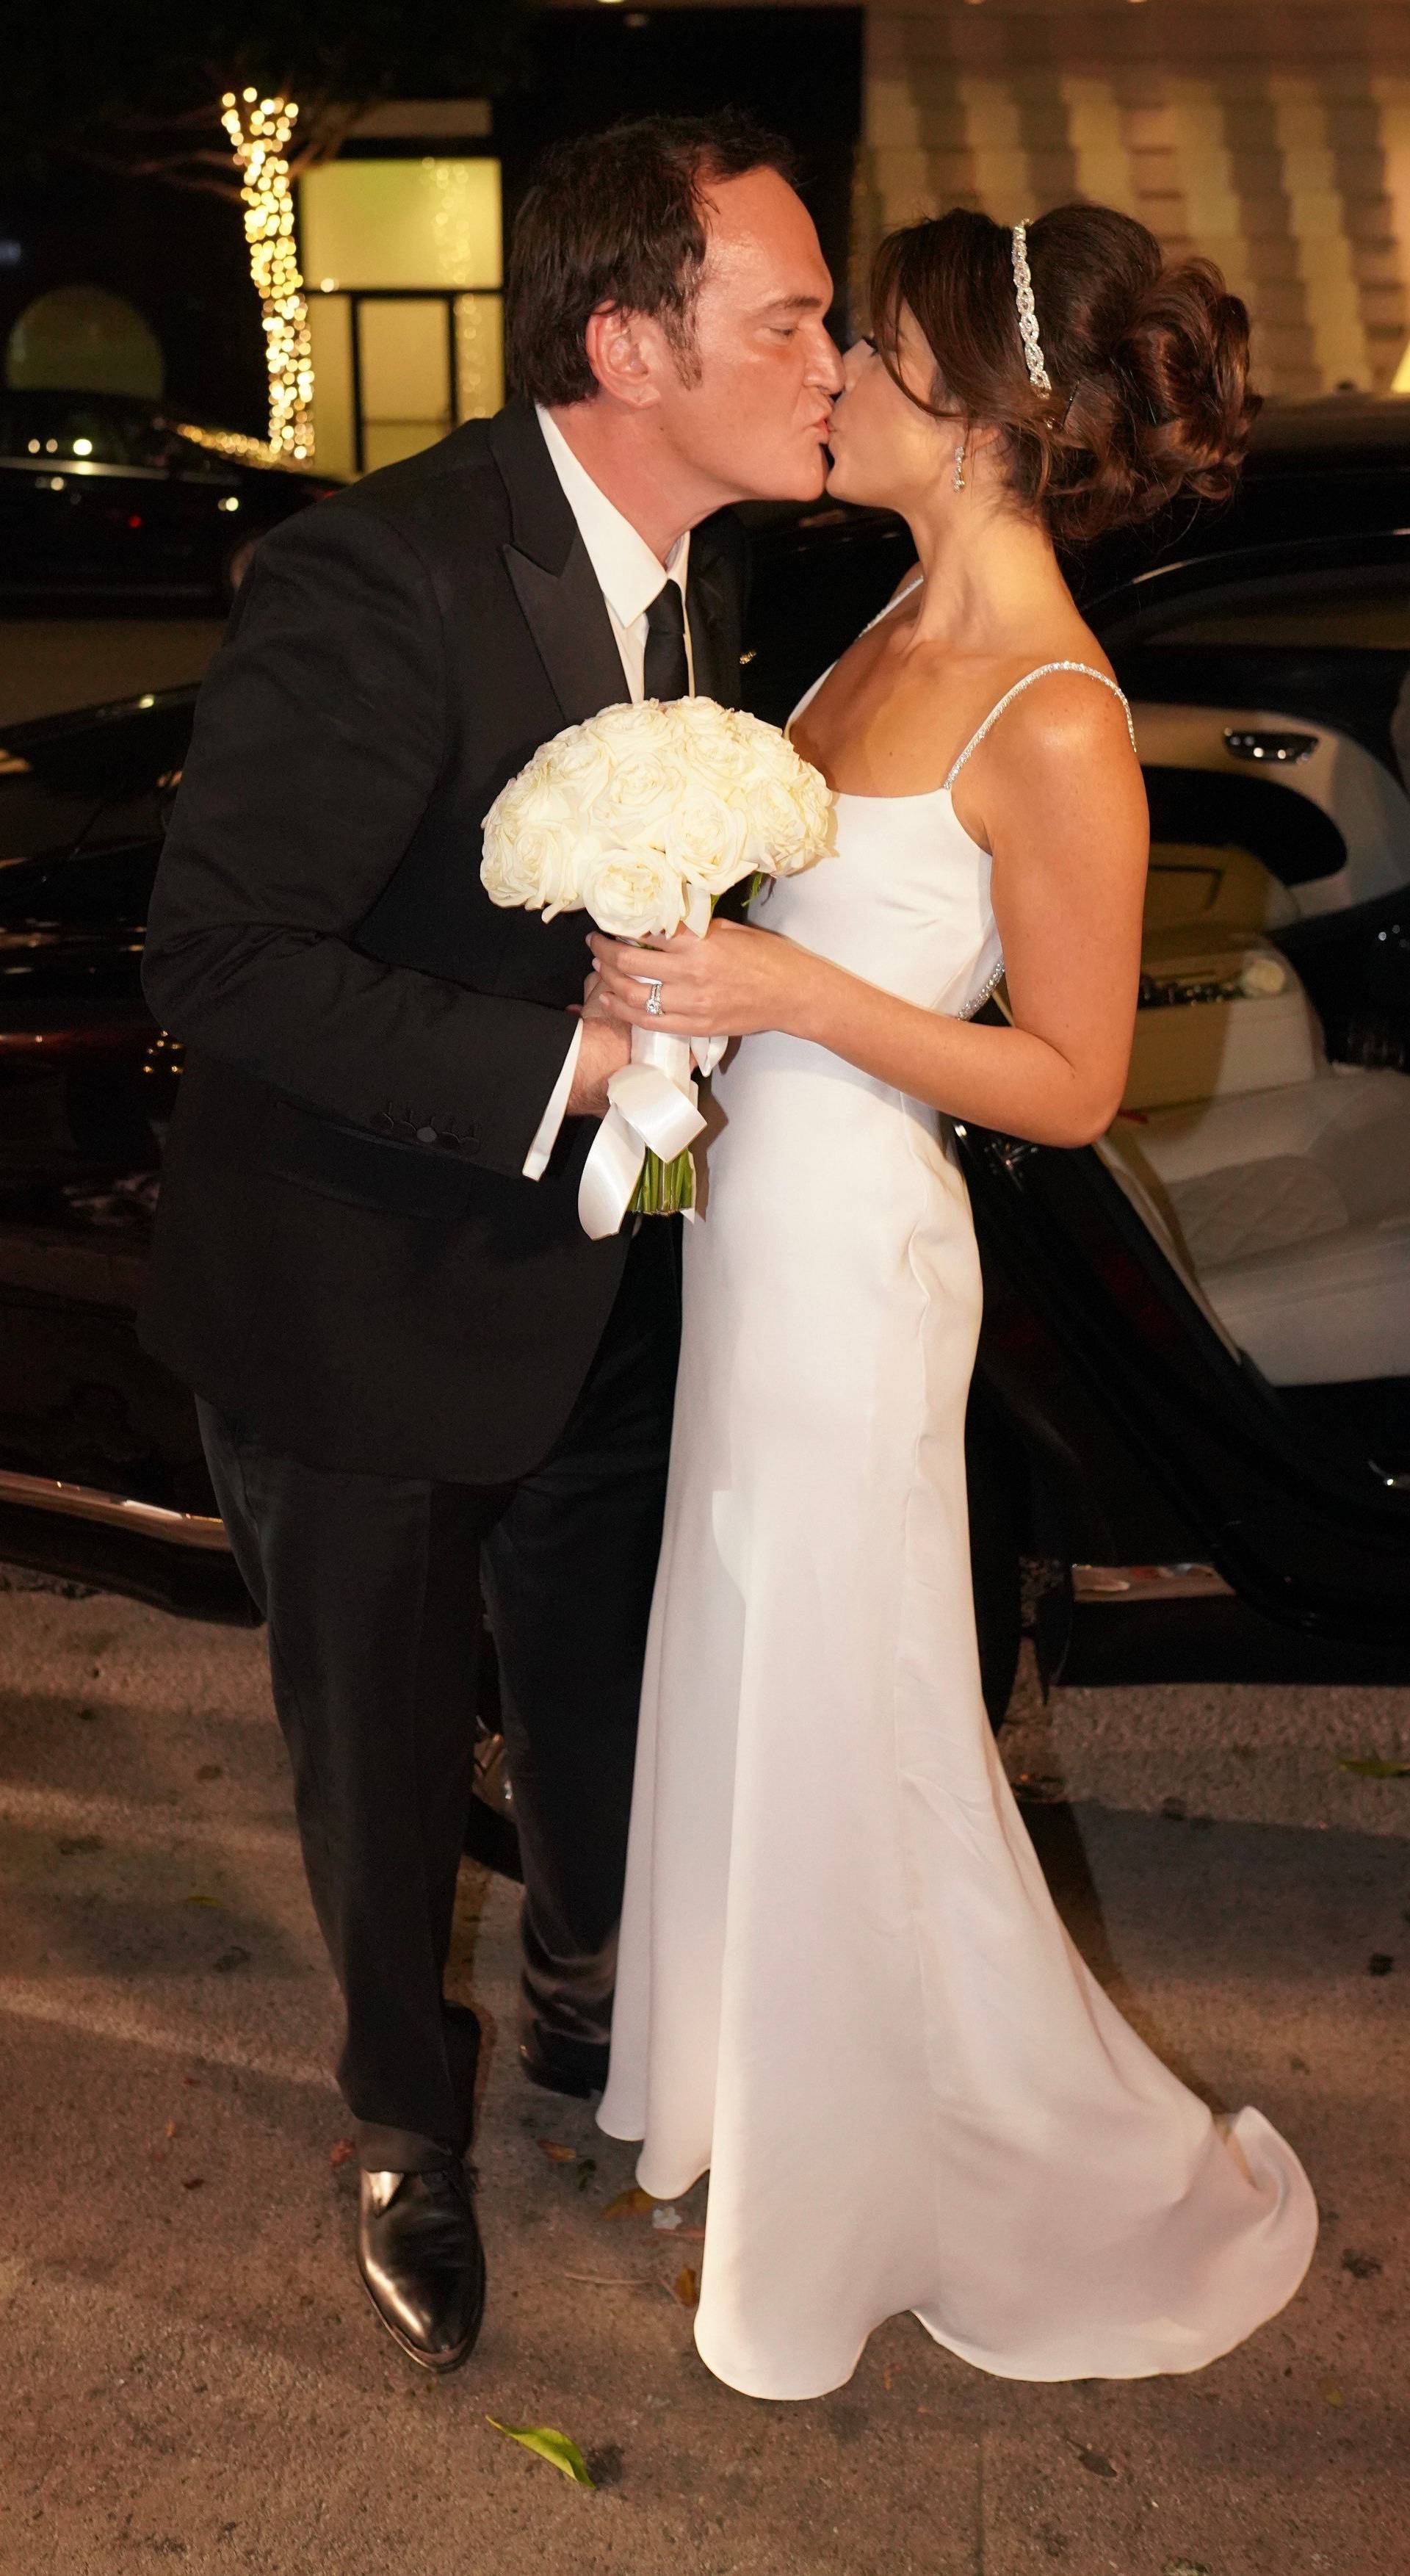 Quentin Tarantino And Wife Daniela Pick Arrive At Their Wedding Reception In Los Angeles